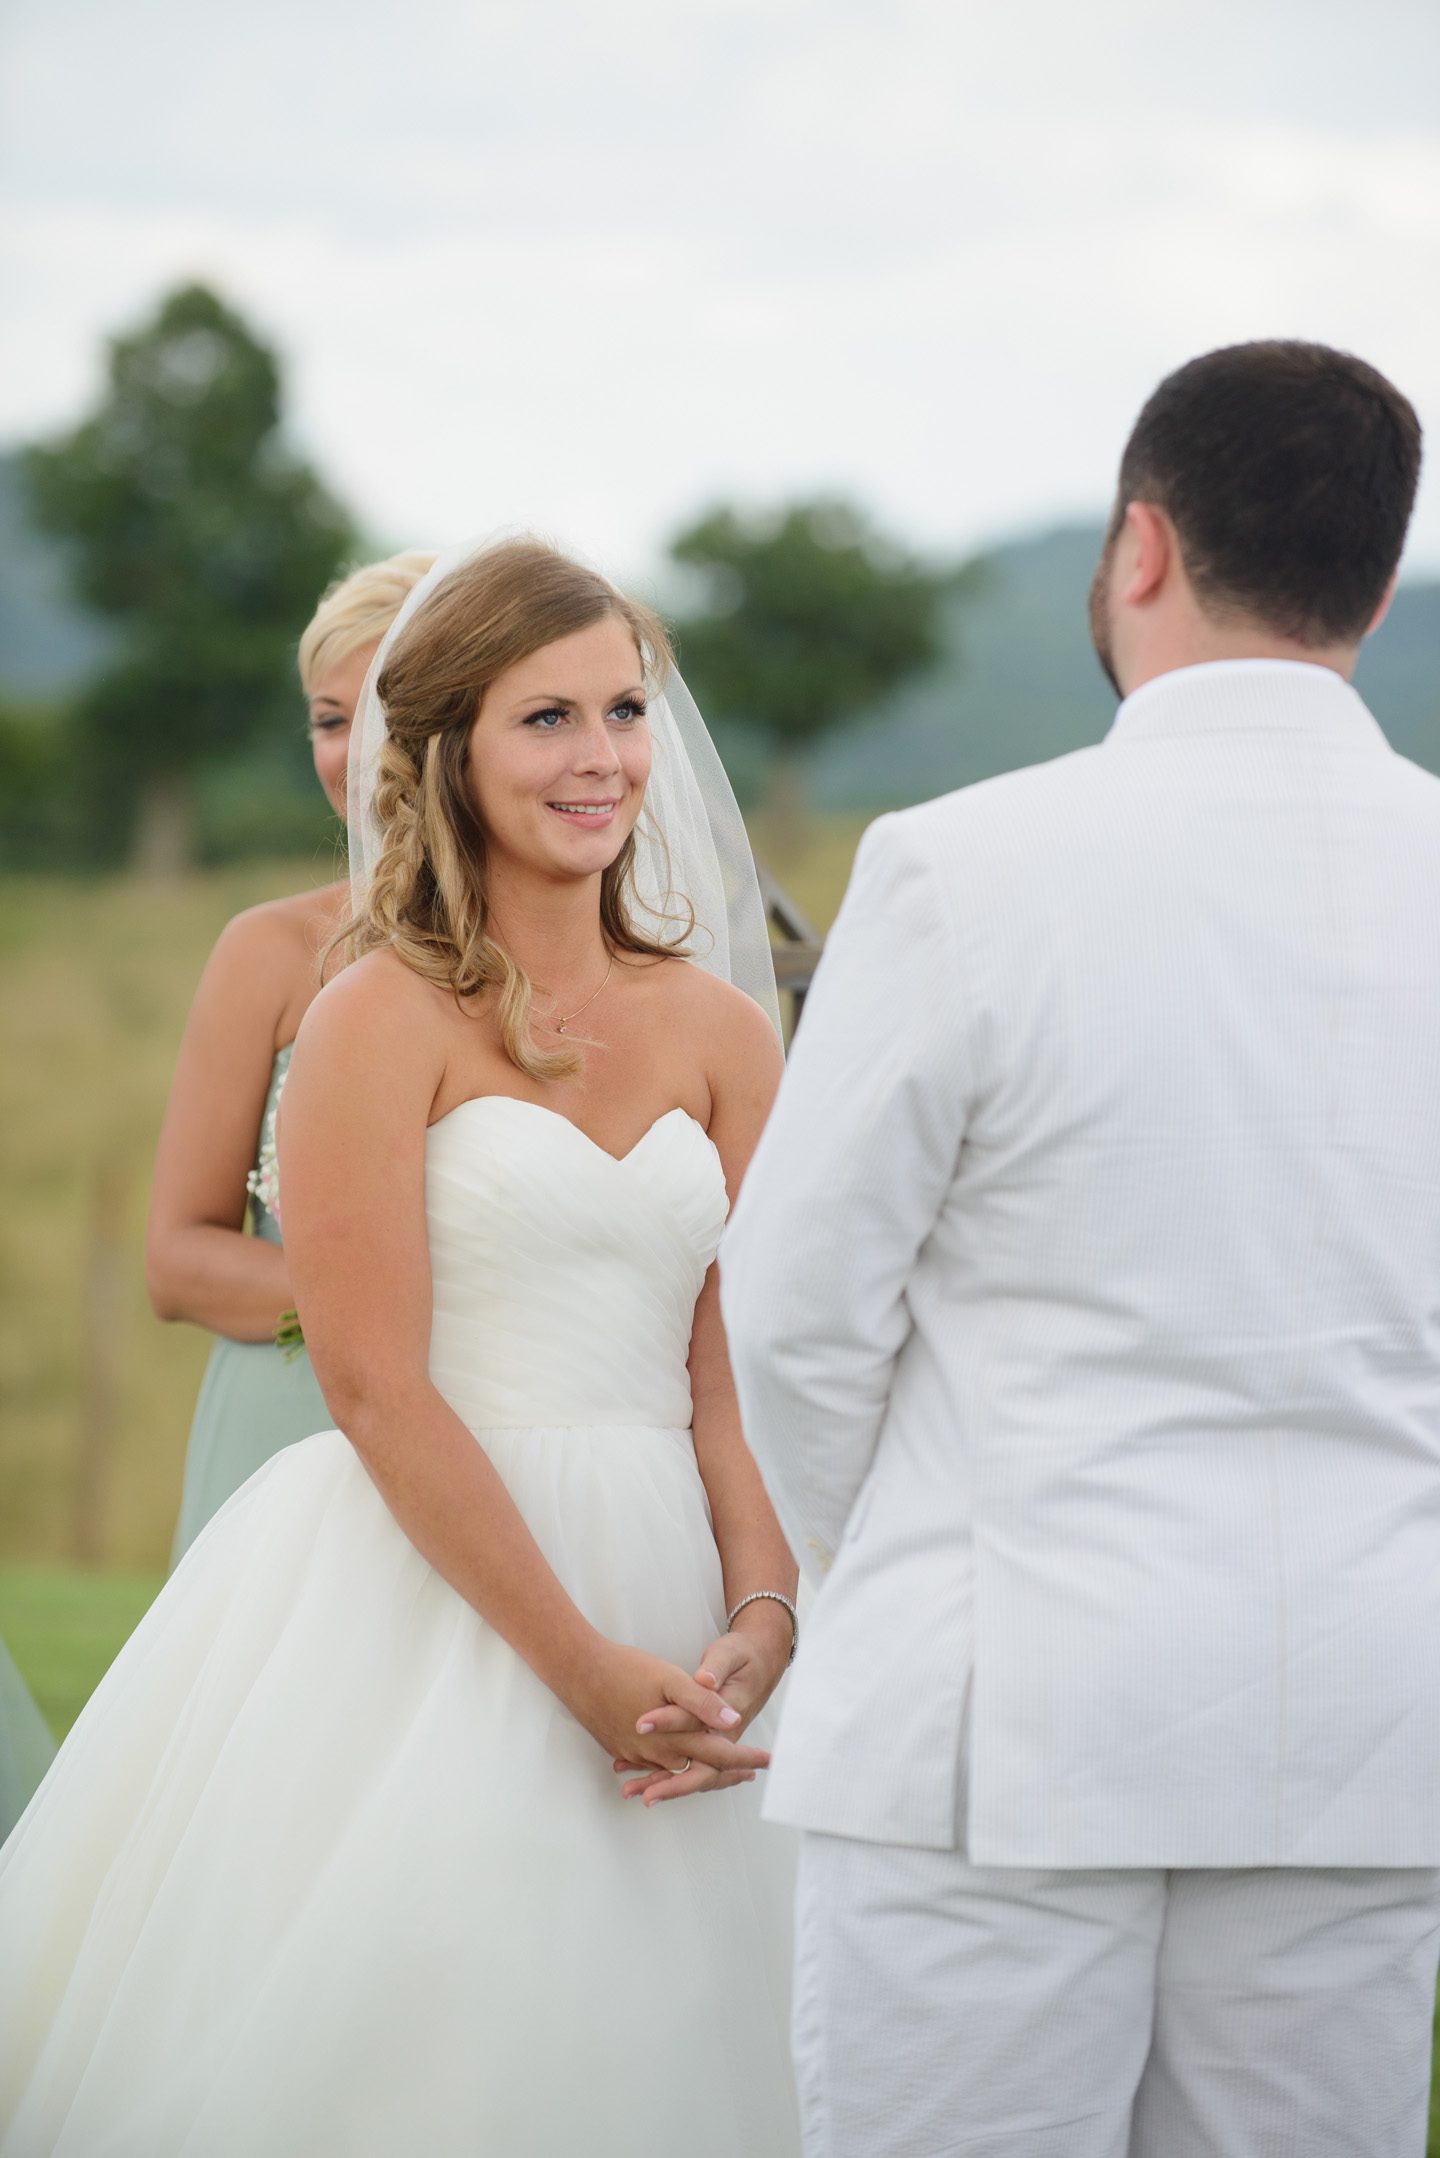 Kelly and Nathan by Neil GT Photography Sinkland Farms Christiansburg VA Wedding Ceremony Bride